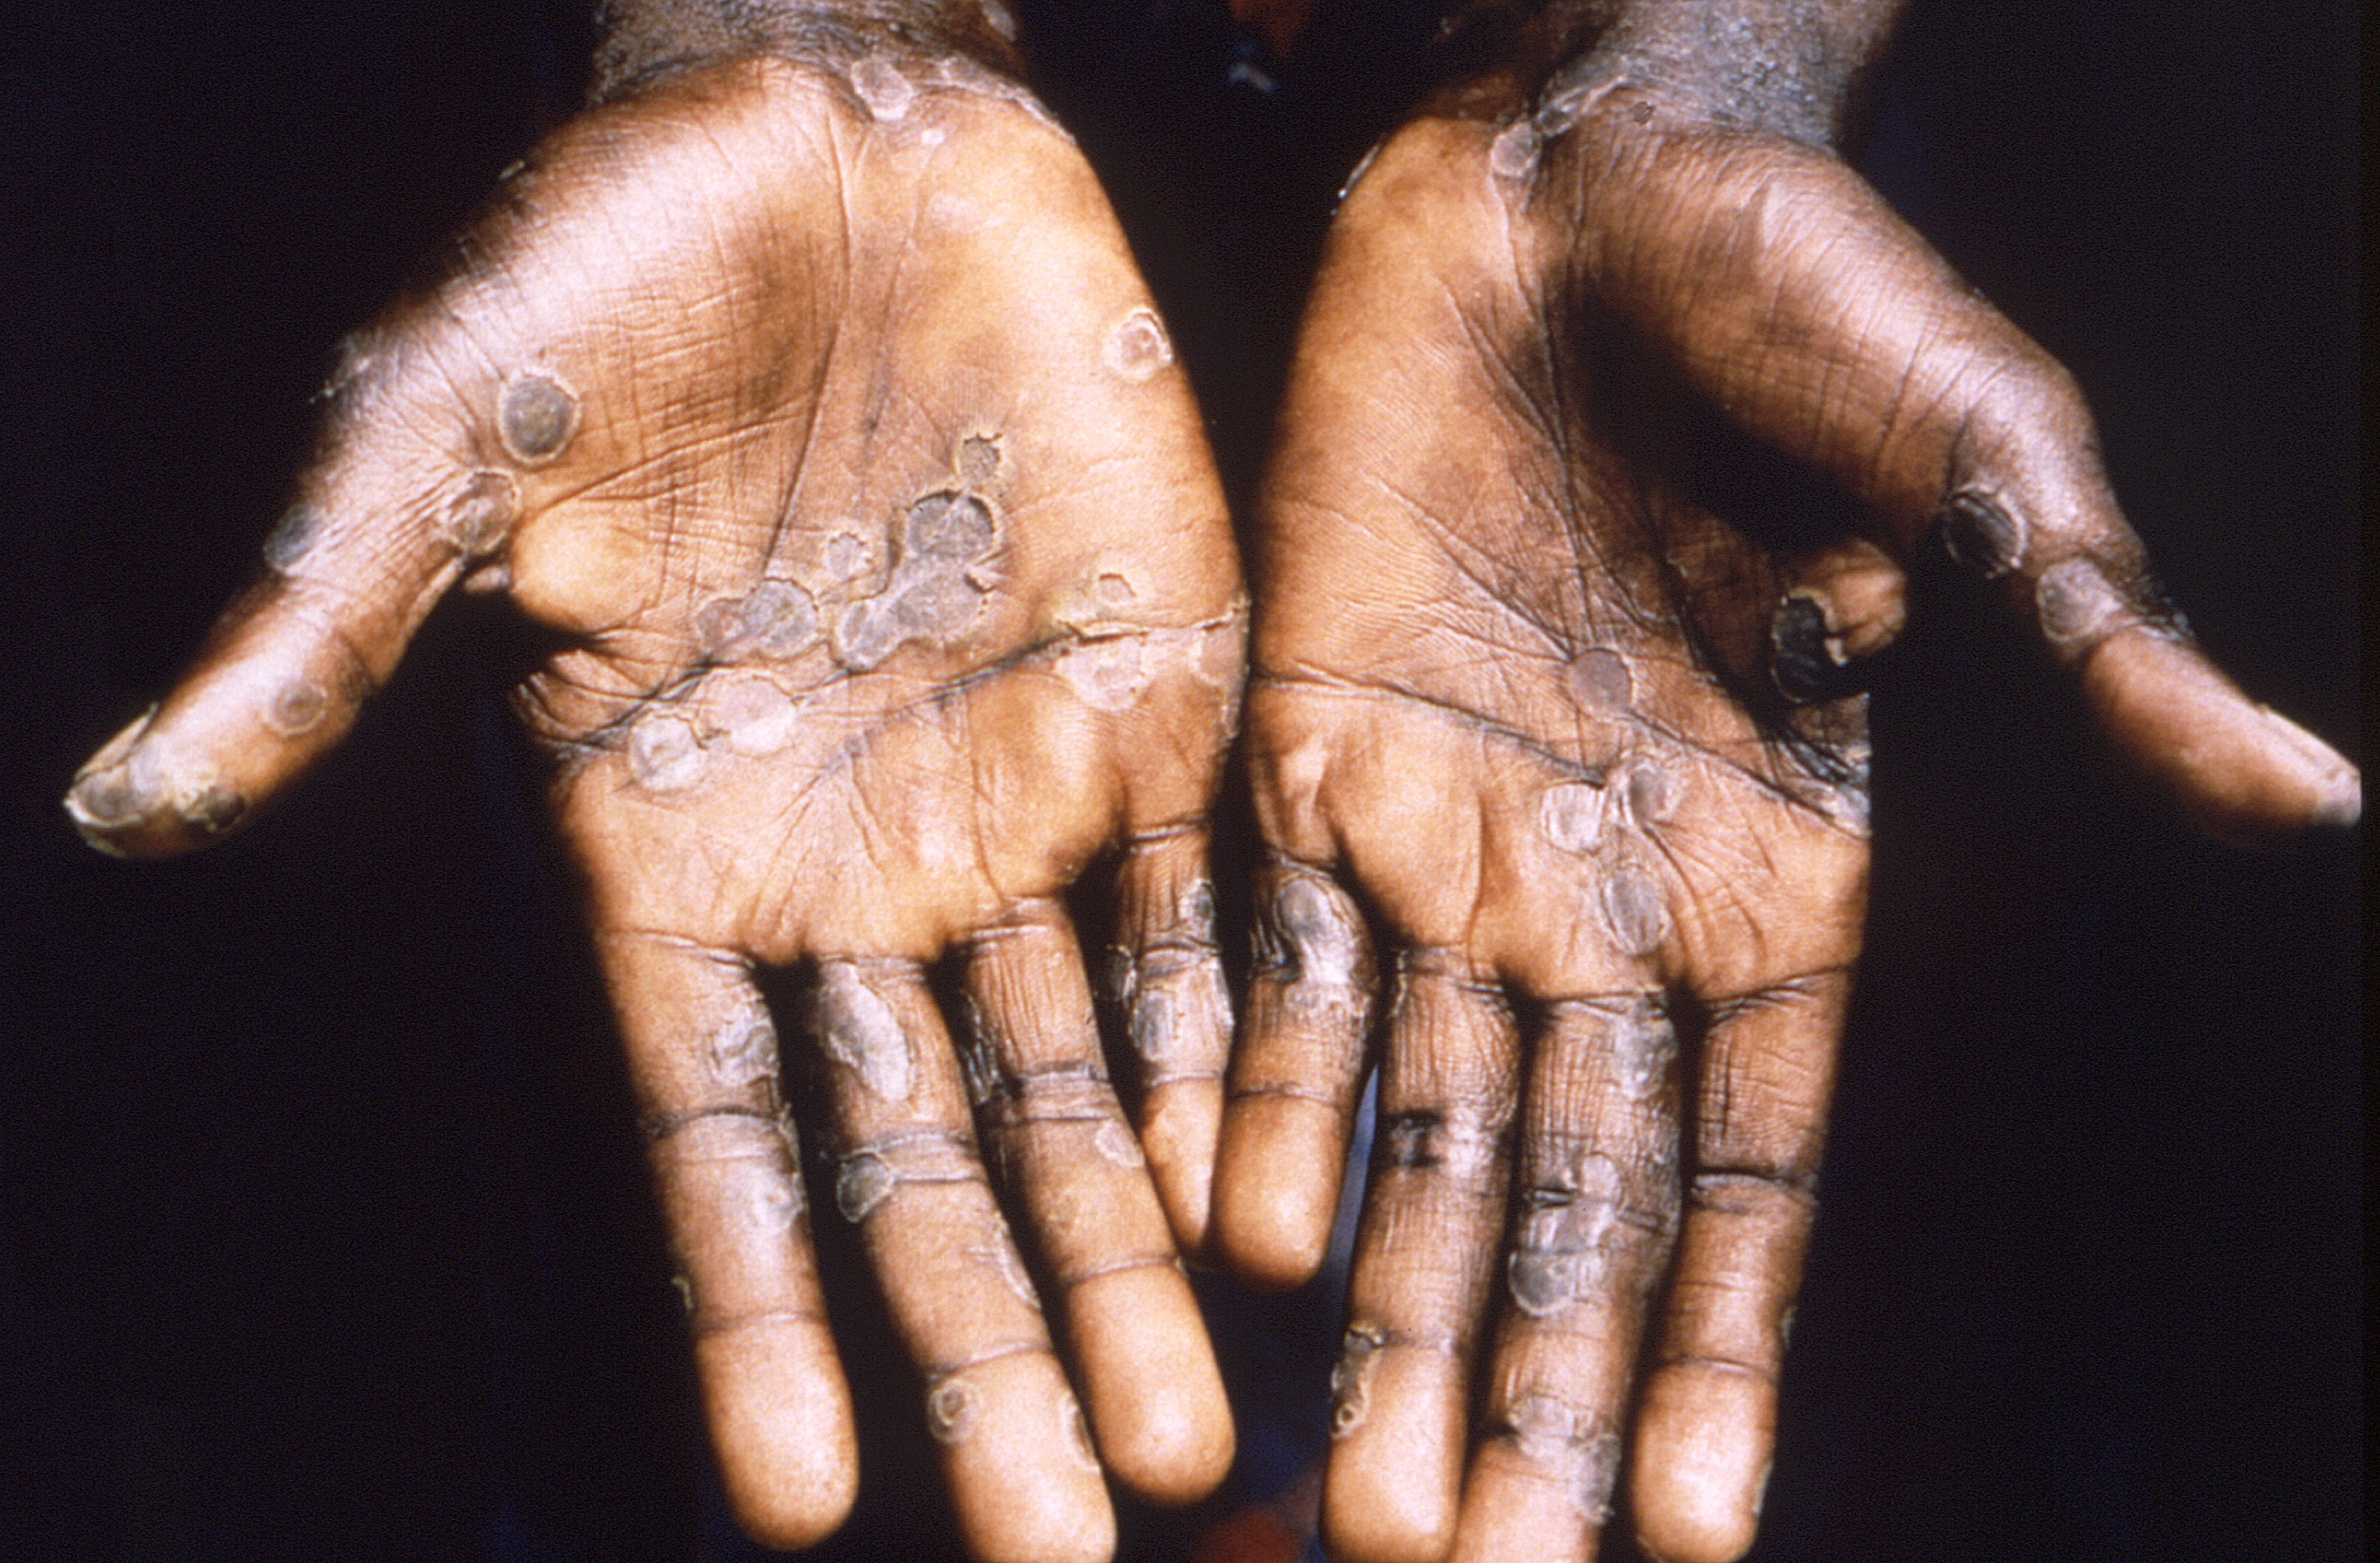 Against a black background, a close-up view of the patient's hands shows injuries caused by the monkey box virus, Democratic Republic of the Congo, 1997. Courtesy CDC / Mahey et al.  (Photo by Smith Collection / Kado / Getty Images)